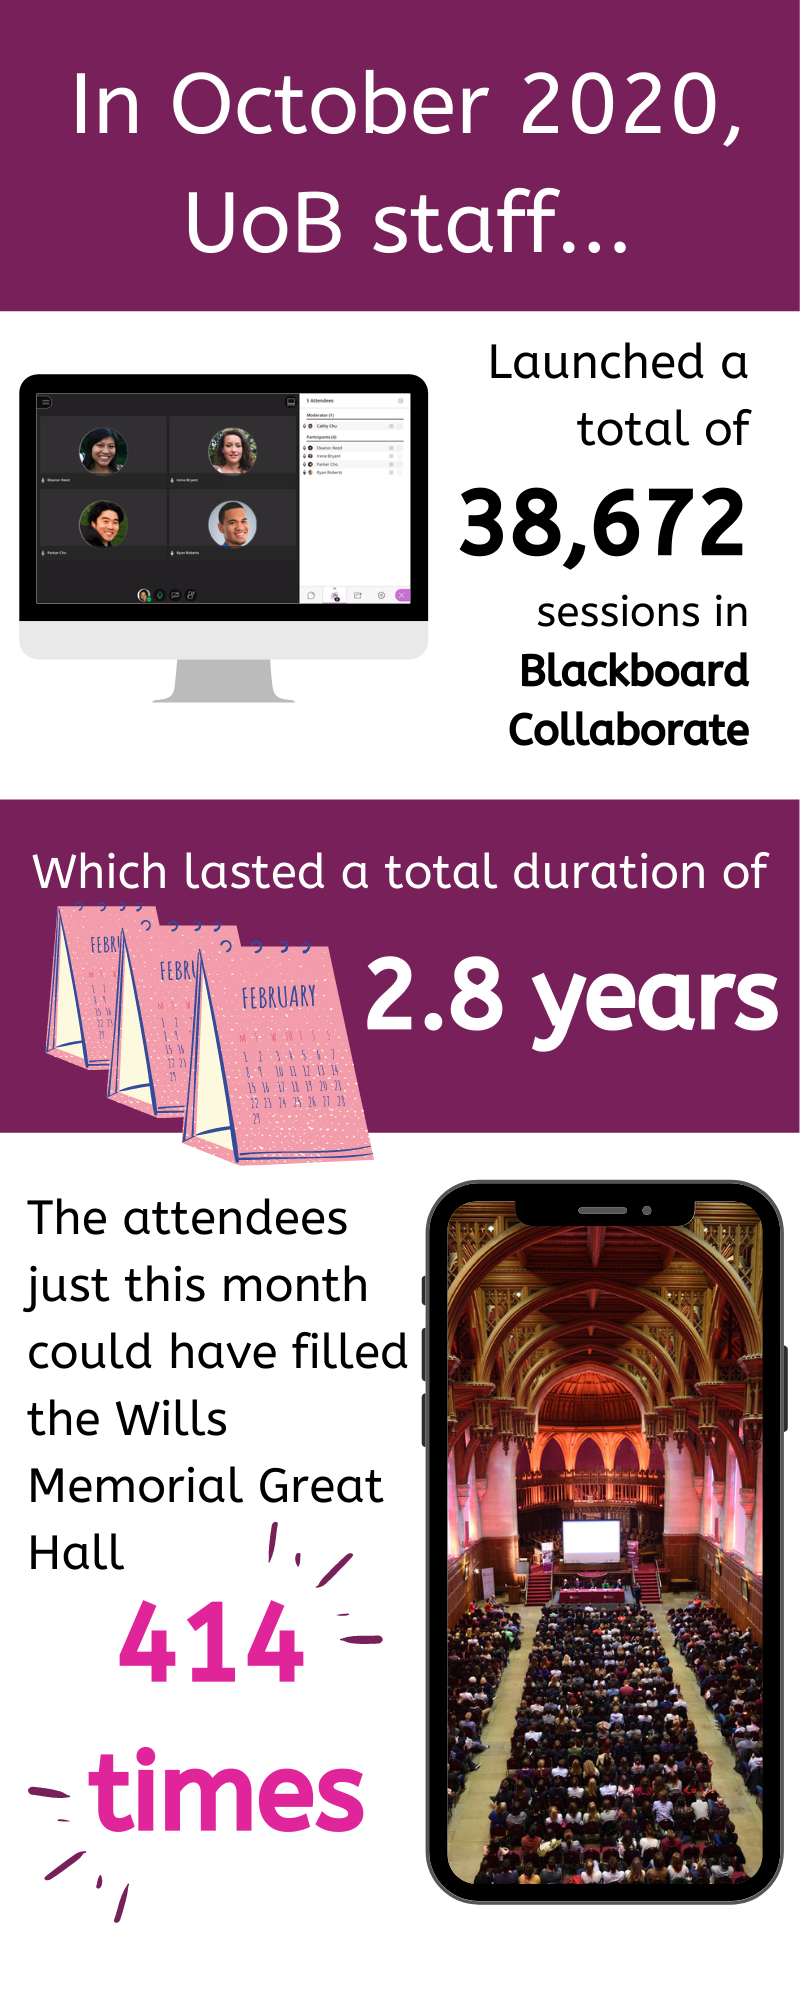 In October 2020, staff launched a total of 38672 sessions in Blackboard Collaborate, which lasted a total duration of 2.8 years. The attendees just this month could have filled the Wills Memorial Great Hall 414 times.